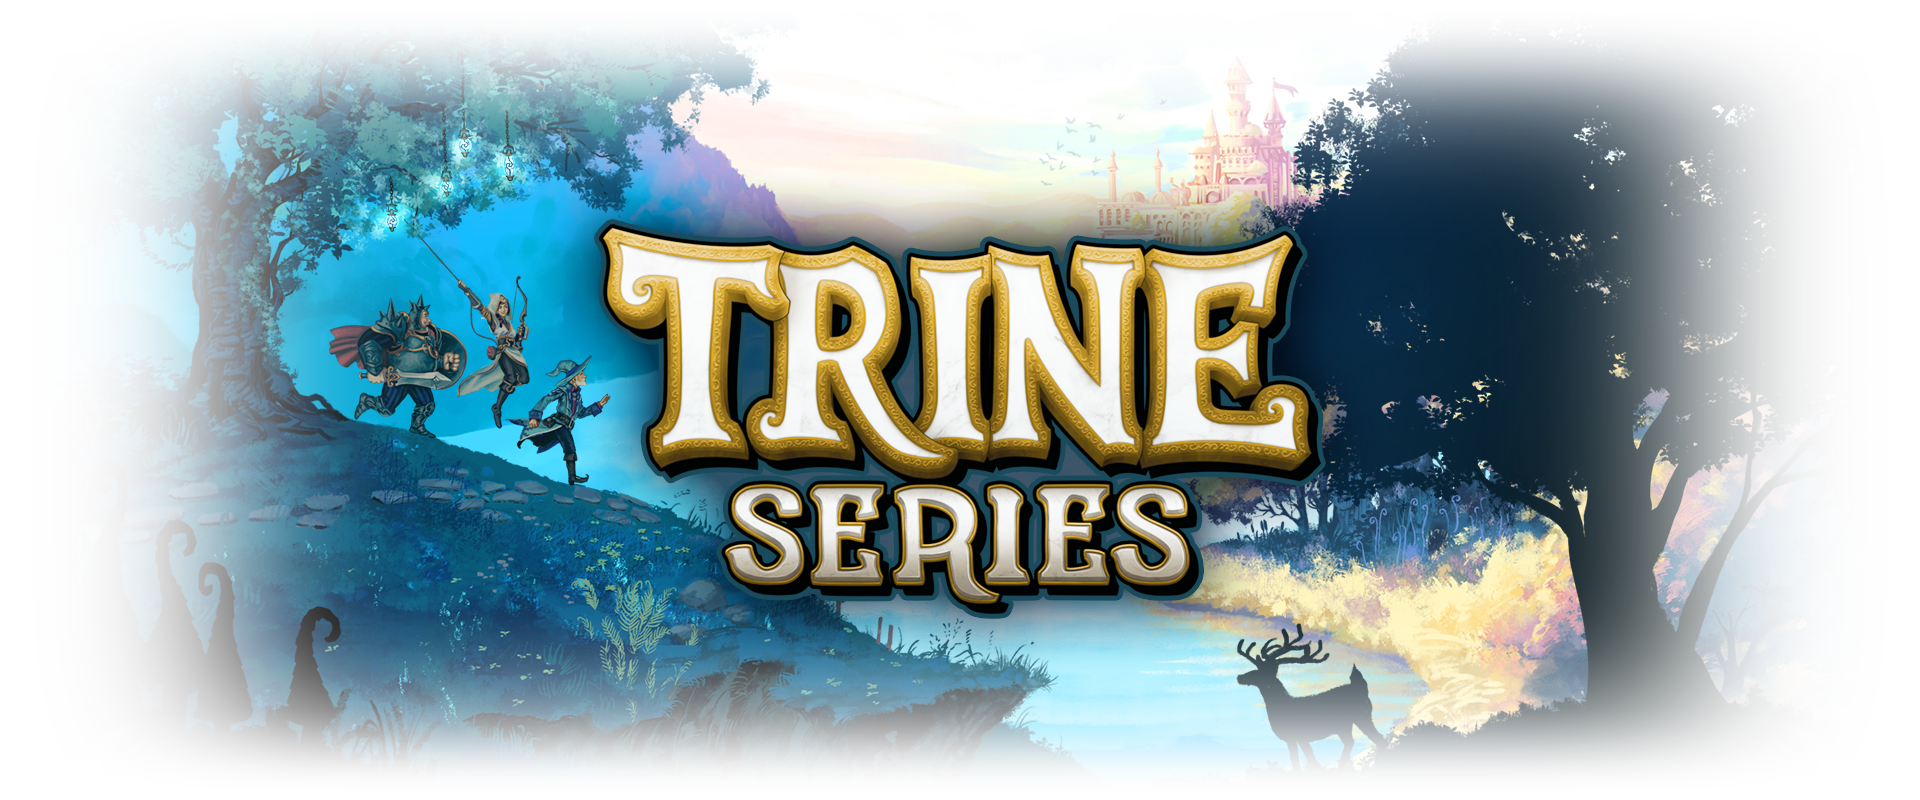 Image with the Trine Series logo in the middle. The playable heroes traverse through a beautiful landscape, with a castle in the horizon and an azure blue lake in the middle